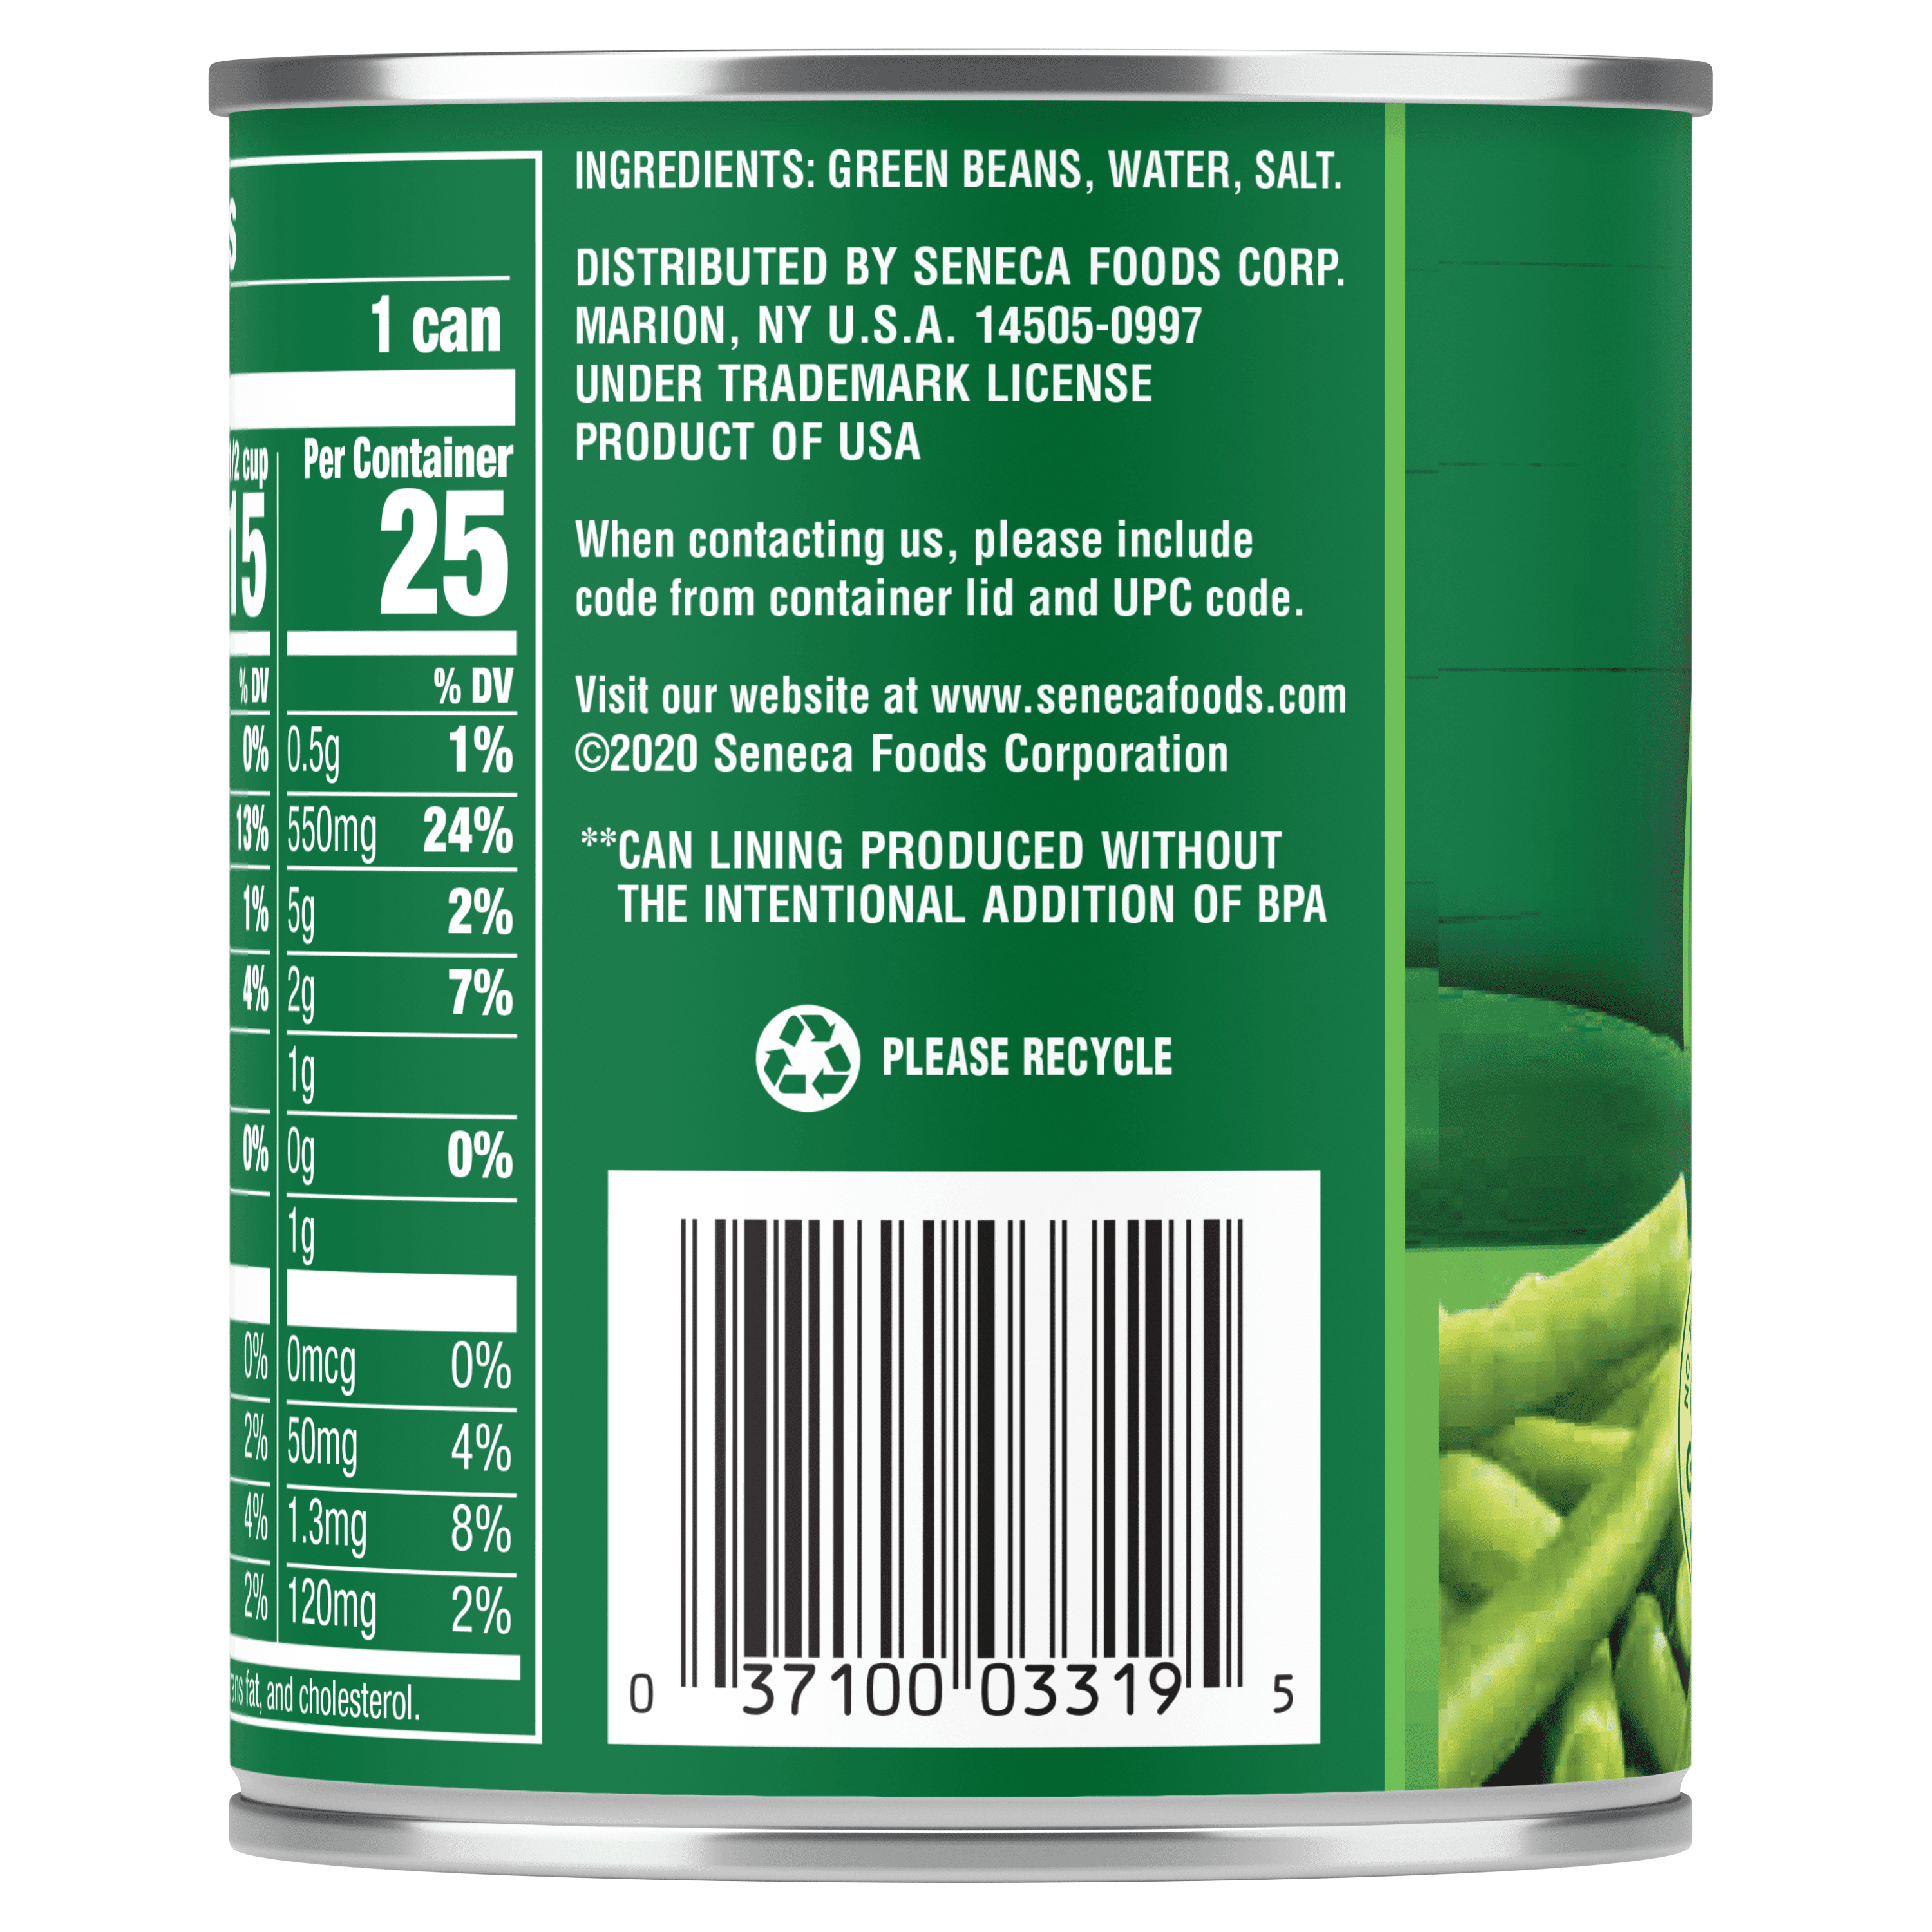 Canned Green Beans Ingredient statement and Recipe, Libby's Cut Green Beans